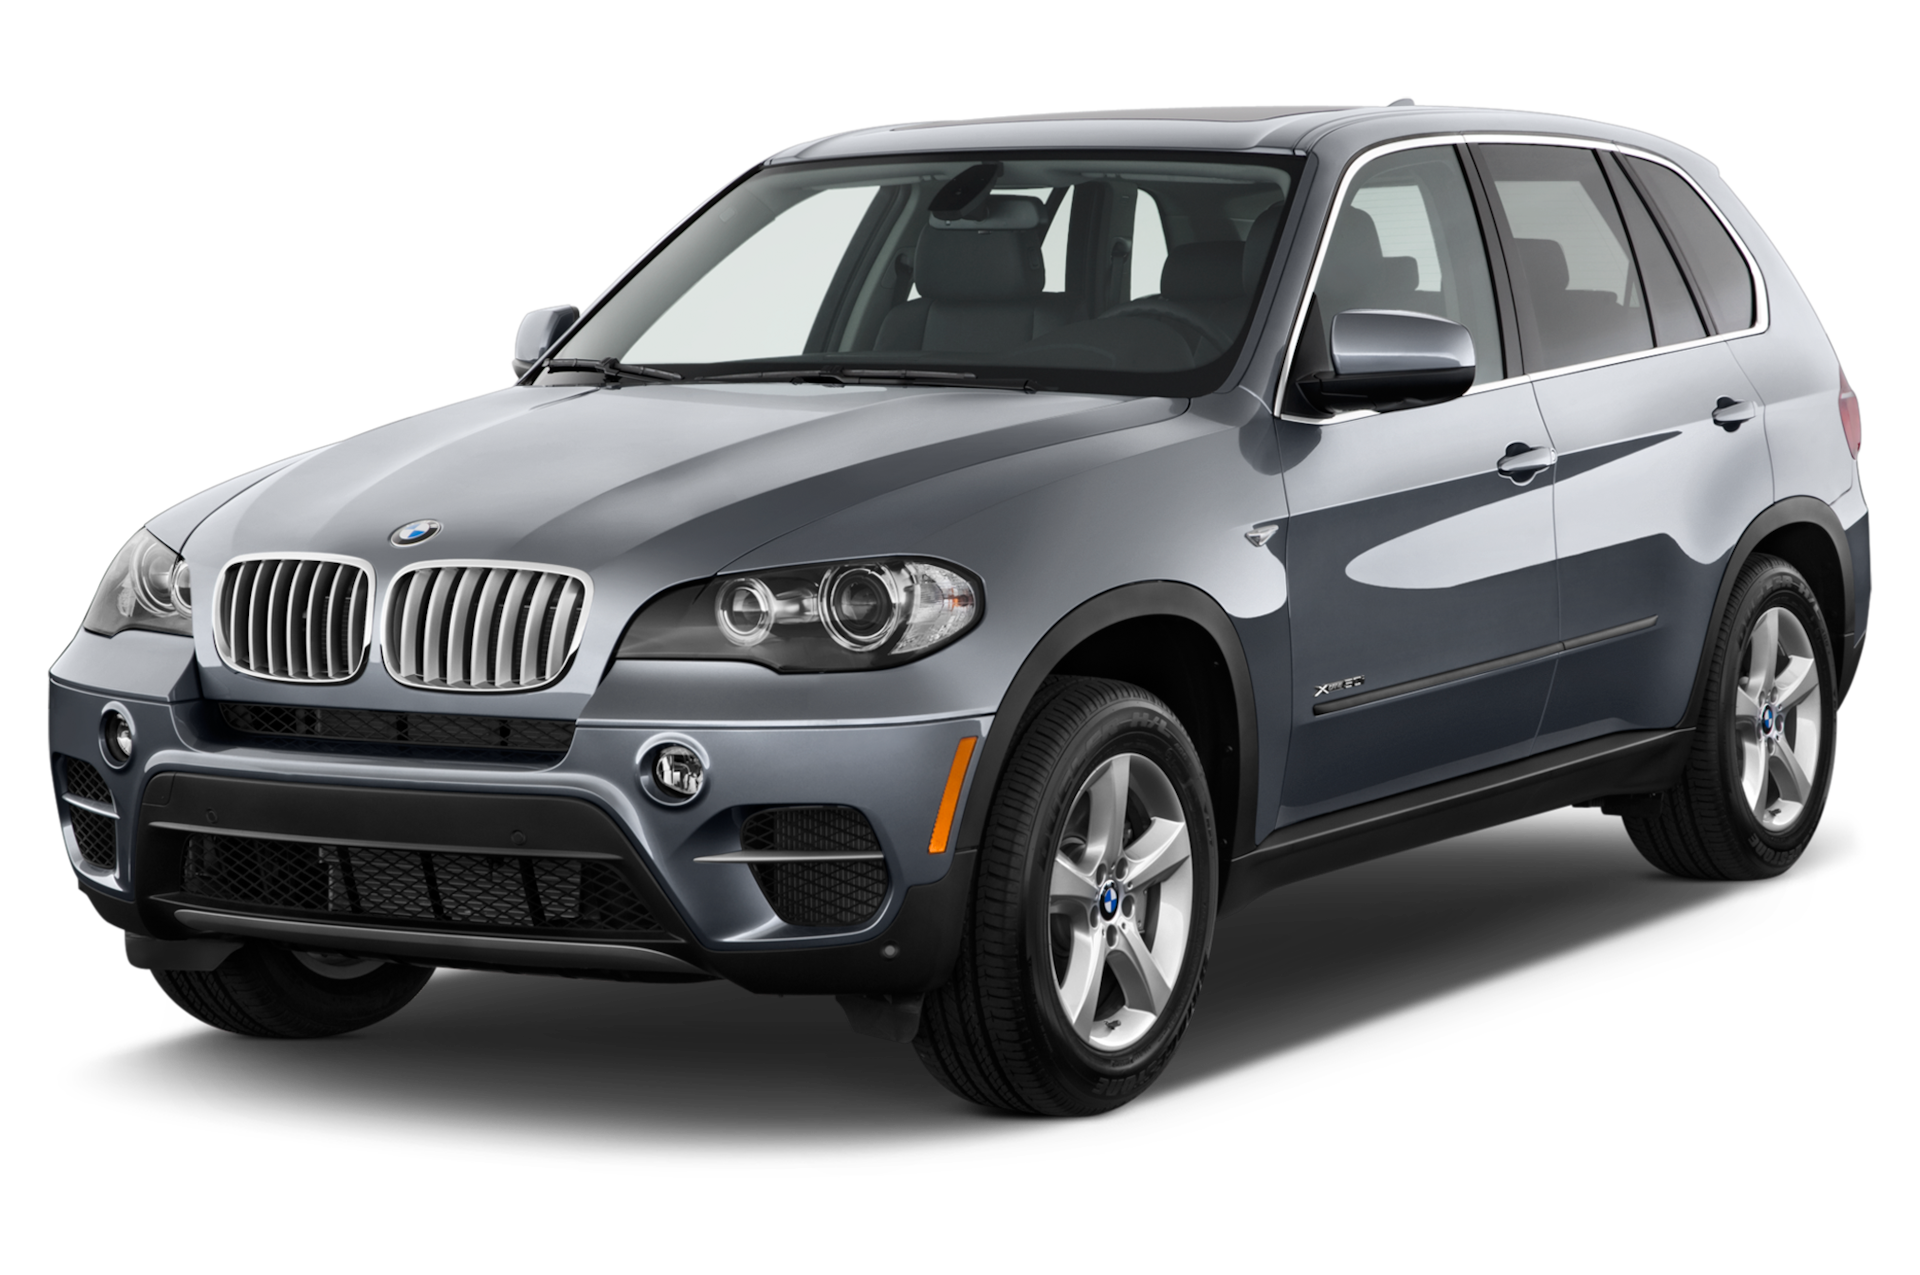 2013 BMW X5 Prices, Reviews, and Photos - MotorTrend